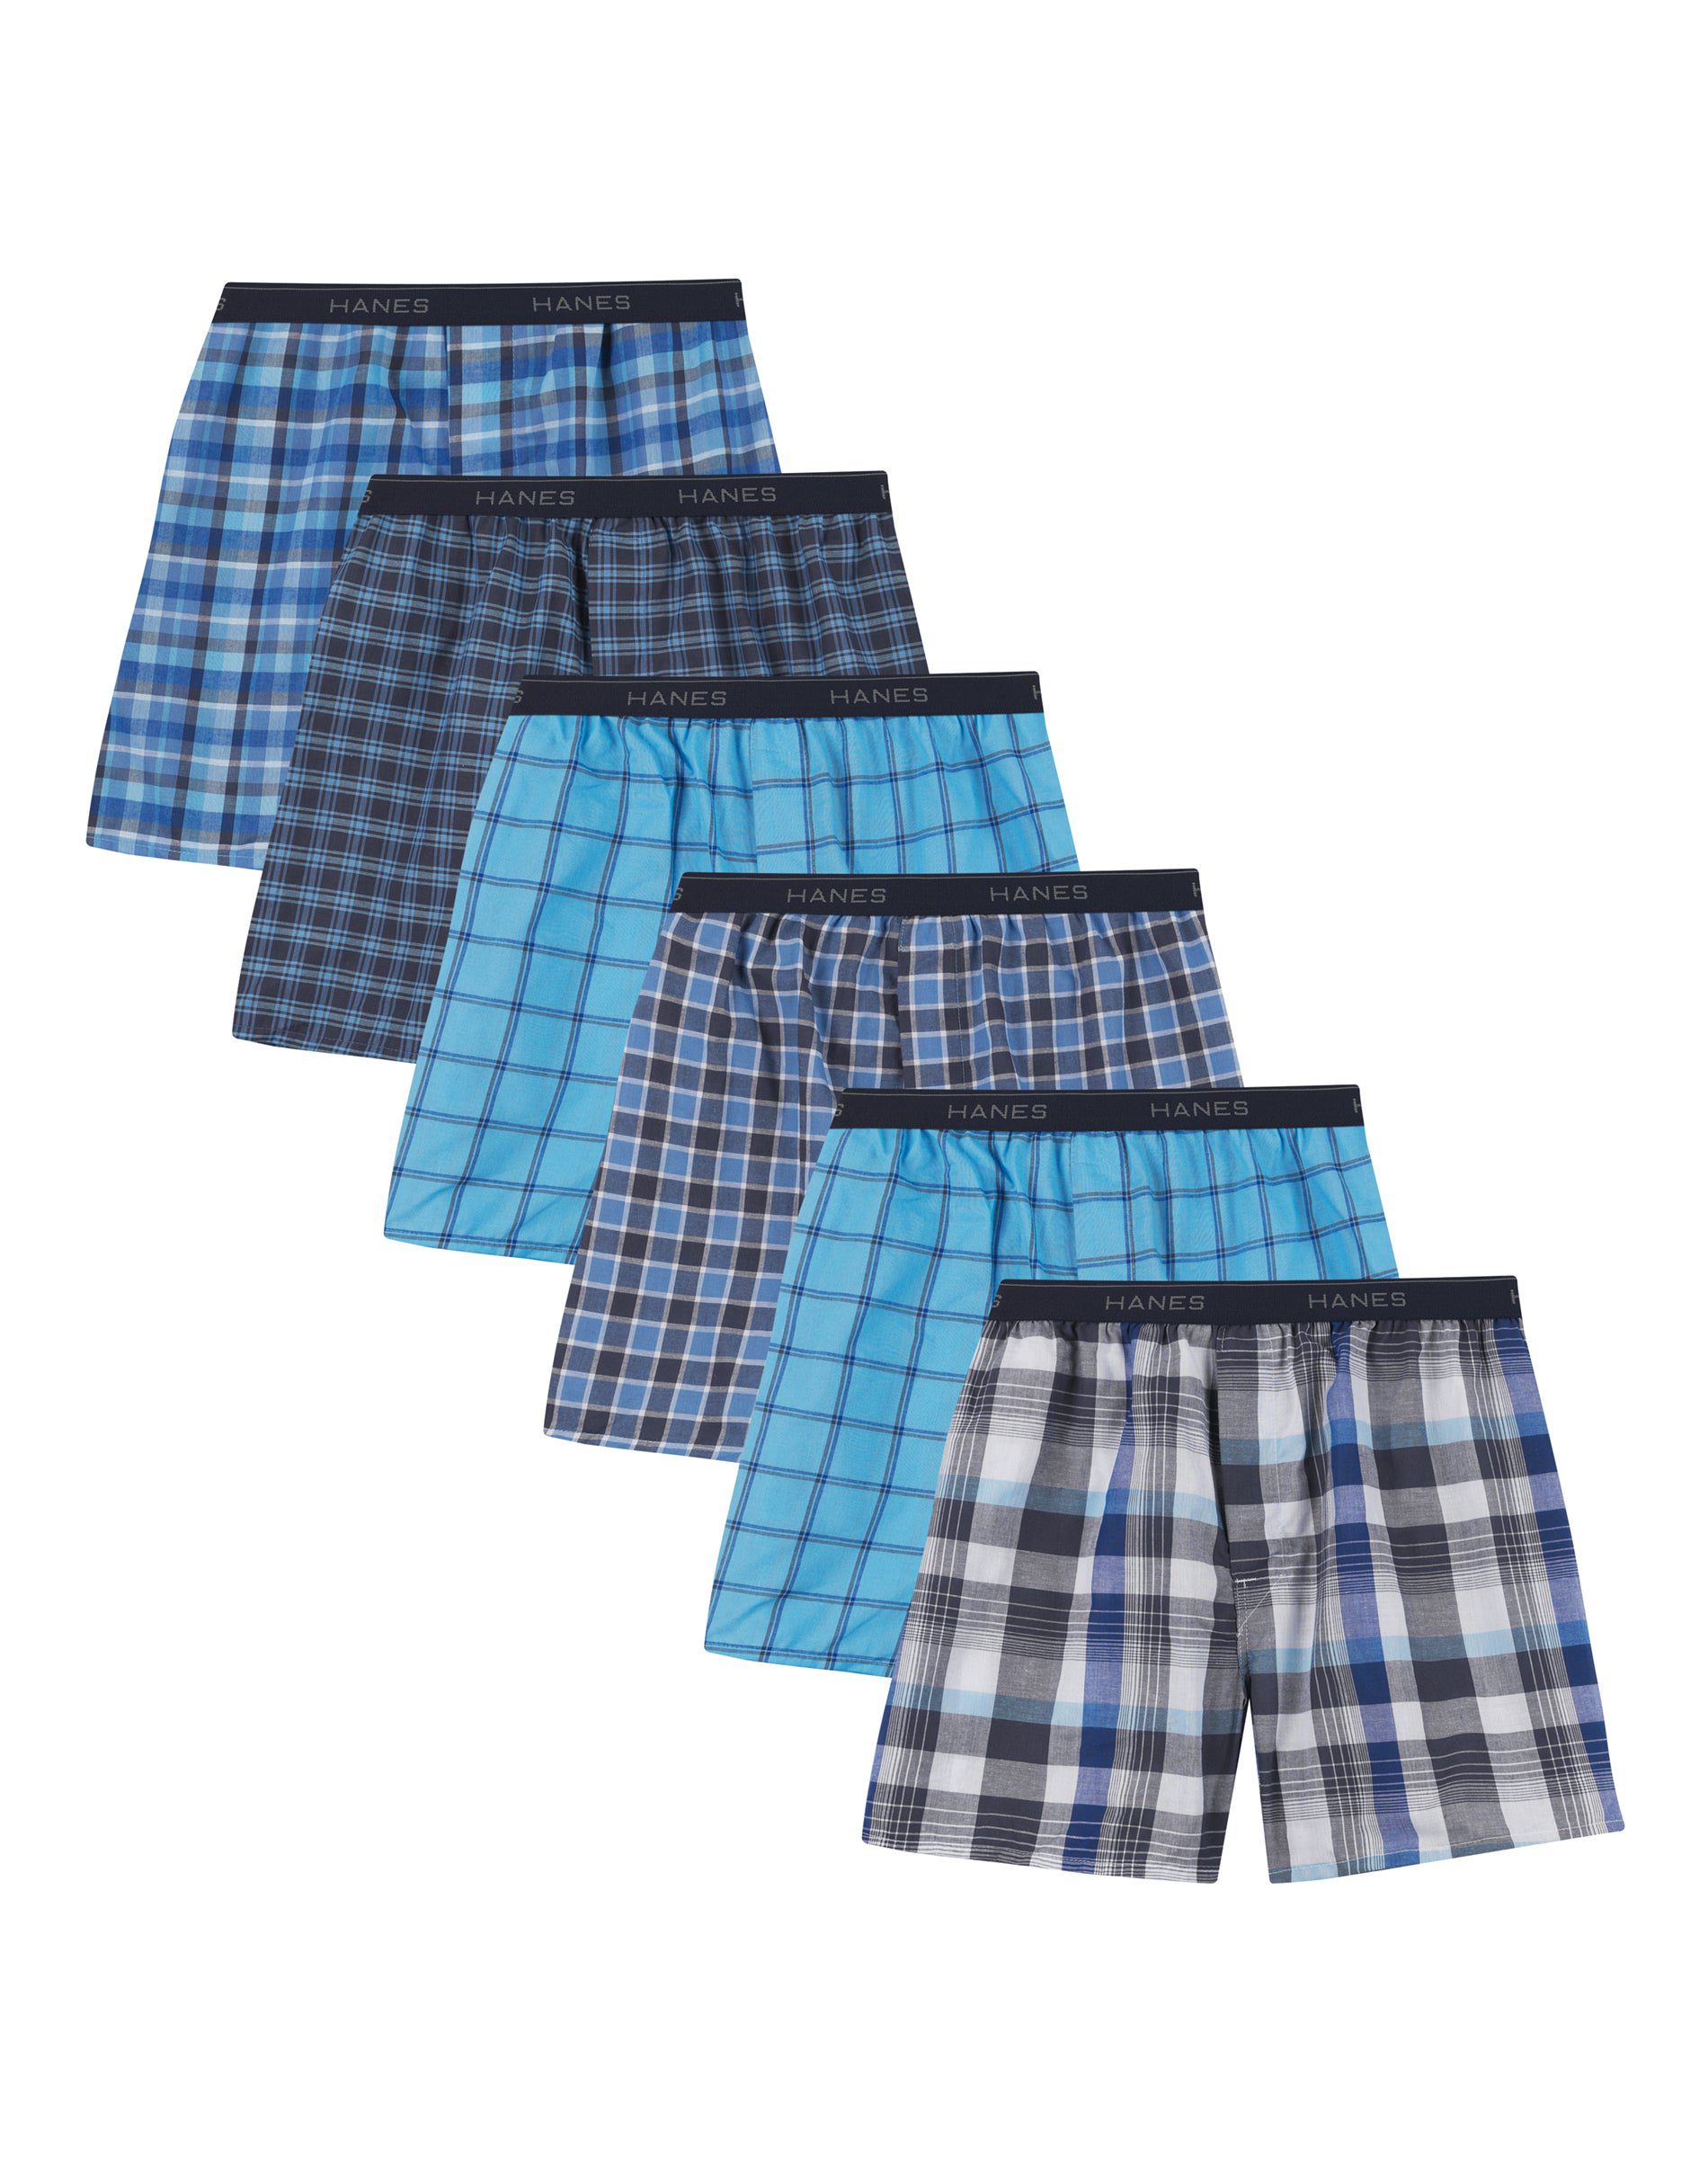 Hanes Mens Woven Boxers 6-Pack - Apparel Direct Distributor